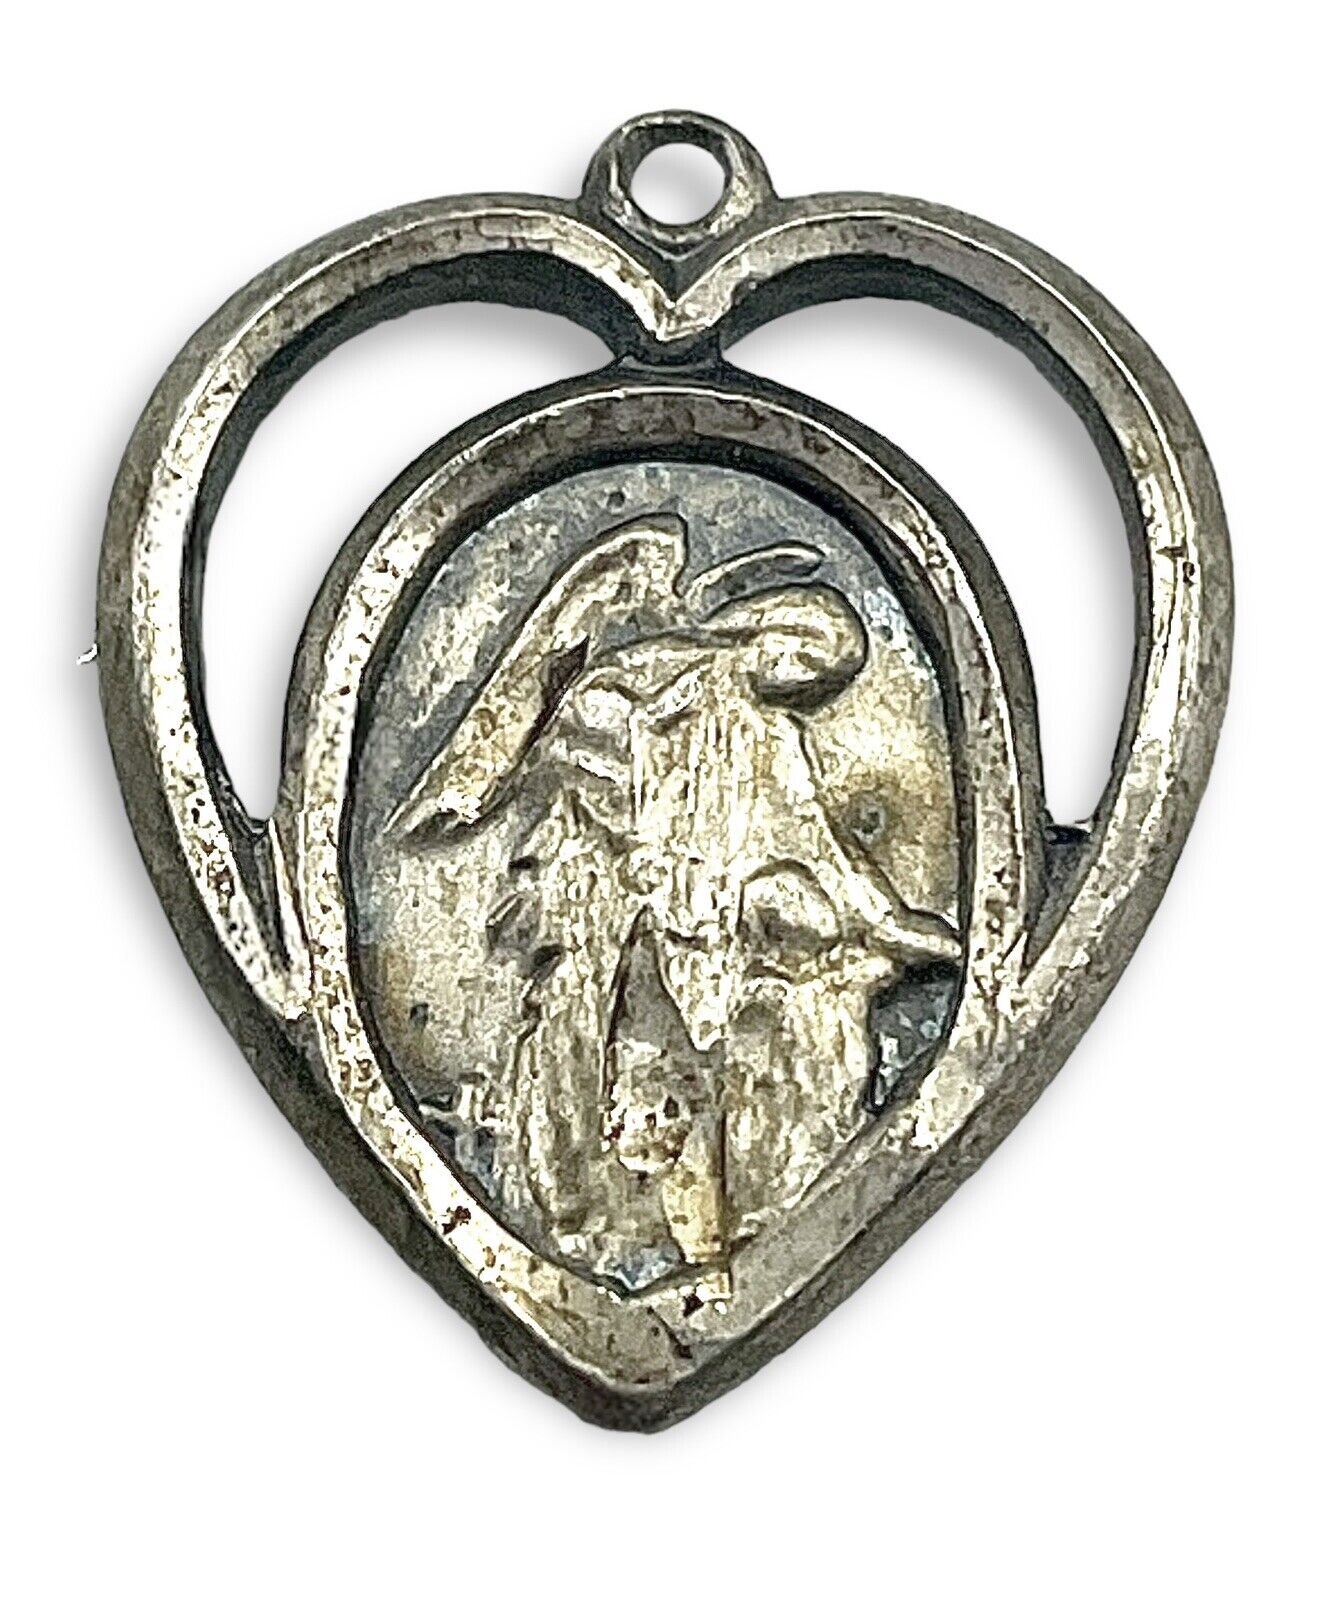 Antique GUARDIAN ANGEL MEDAL Pendant Sterling Silver Family Estate Collection